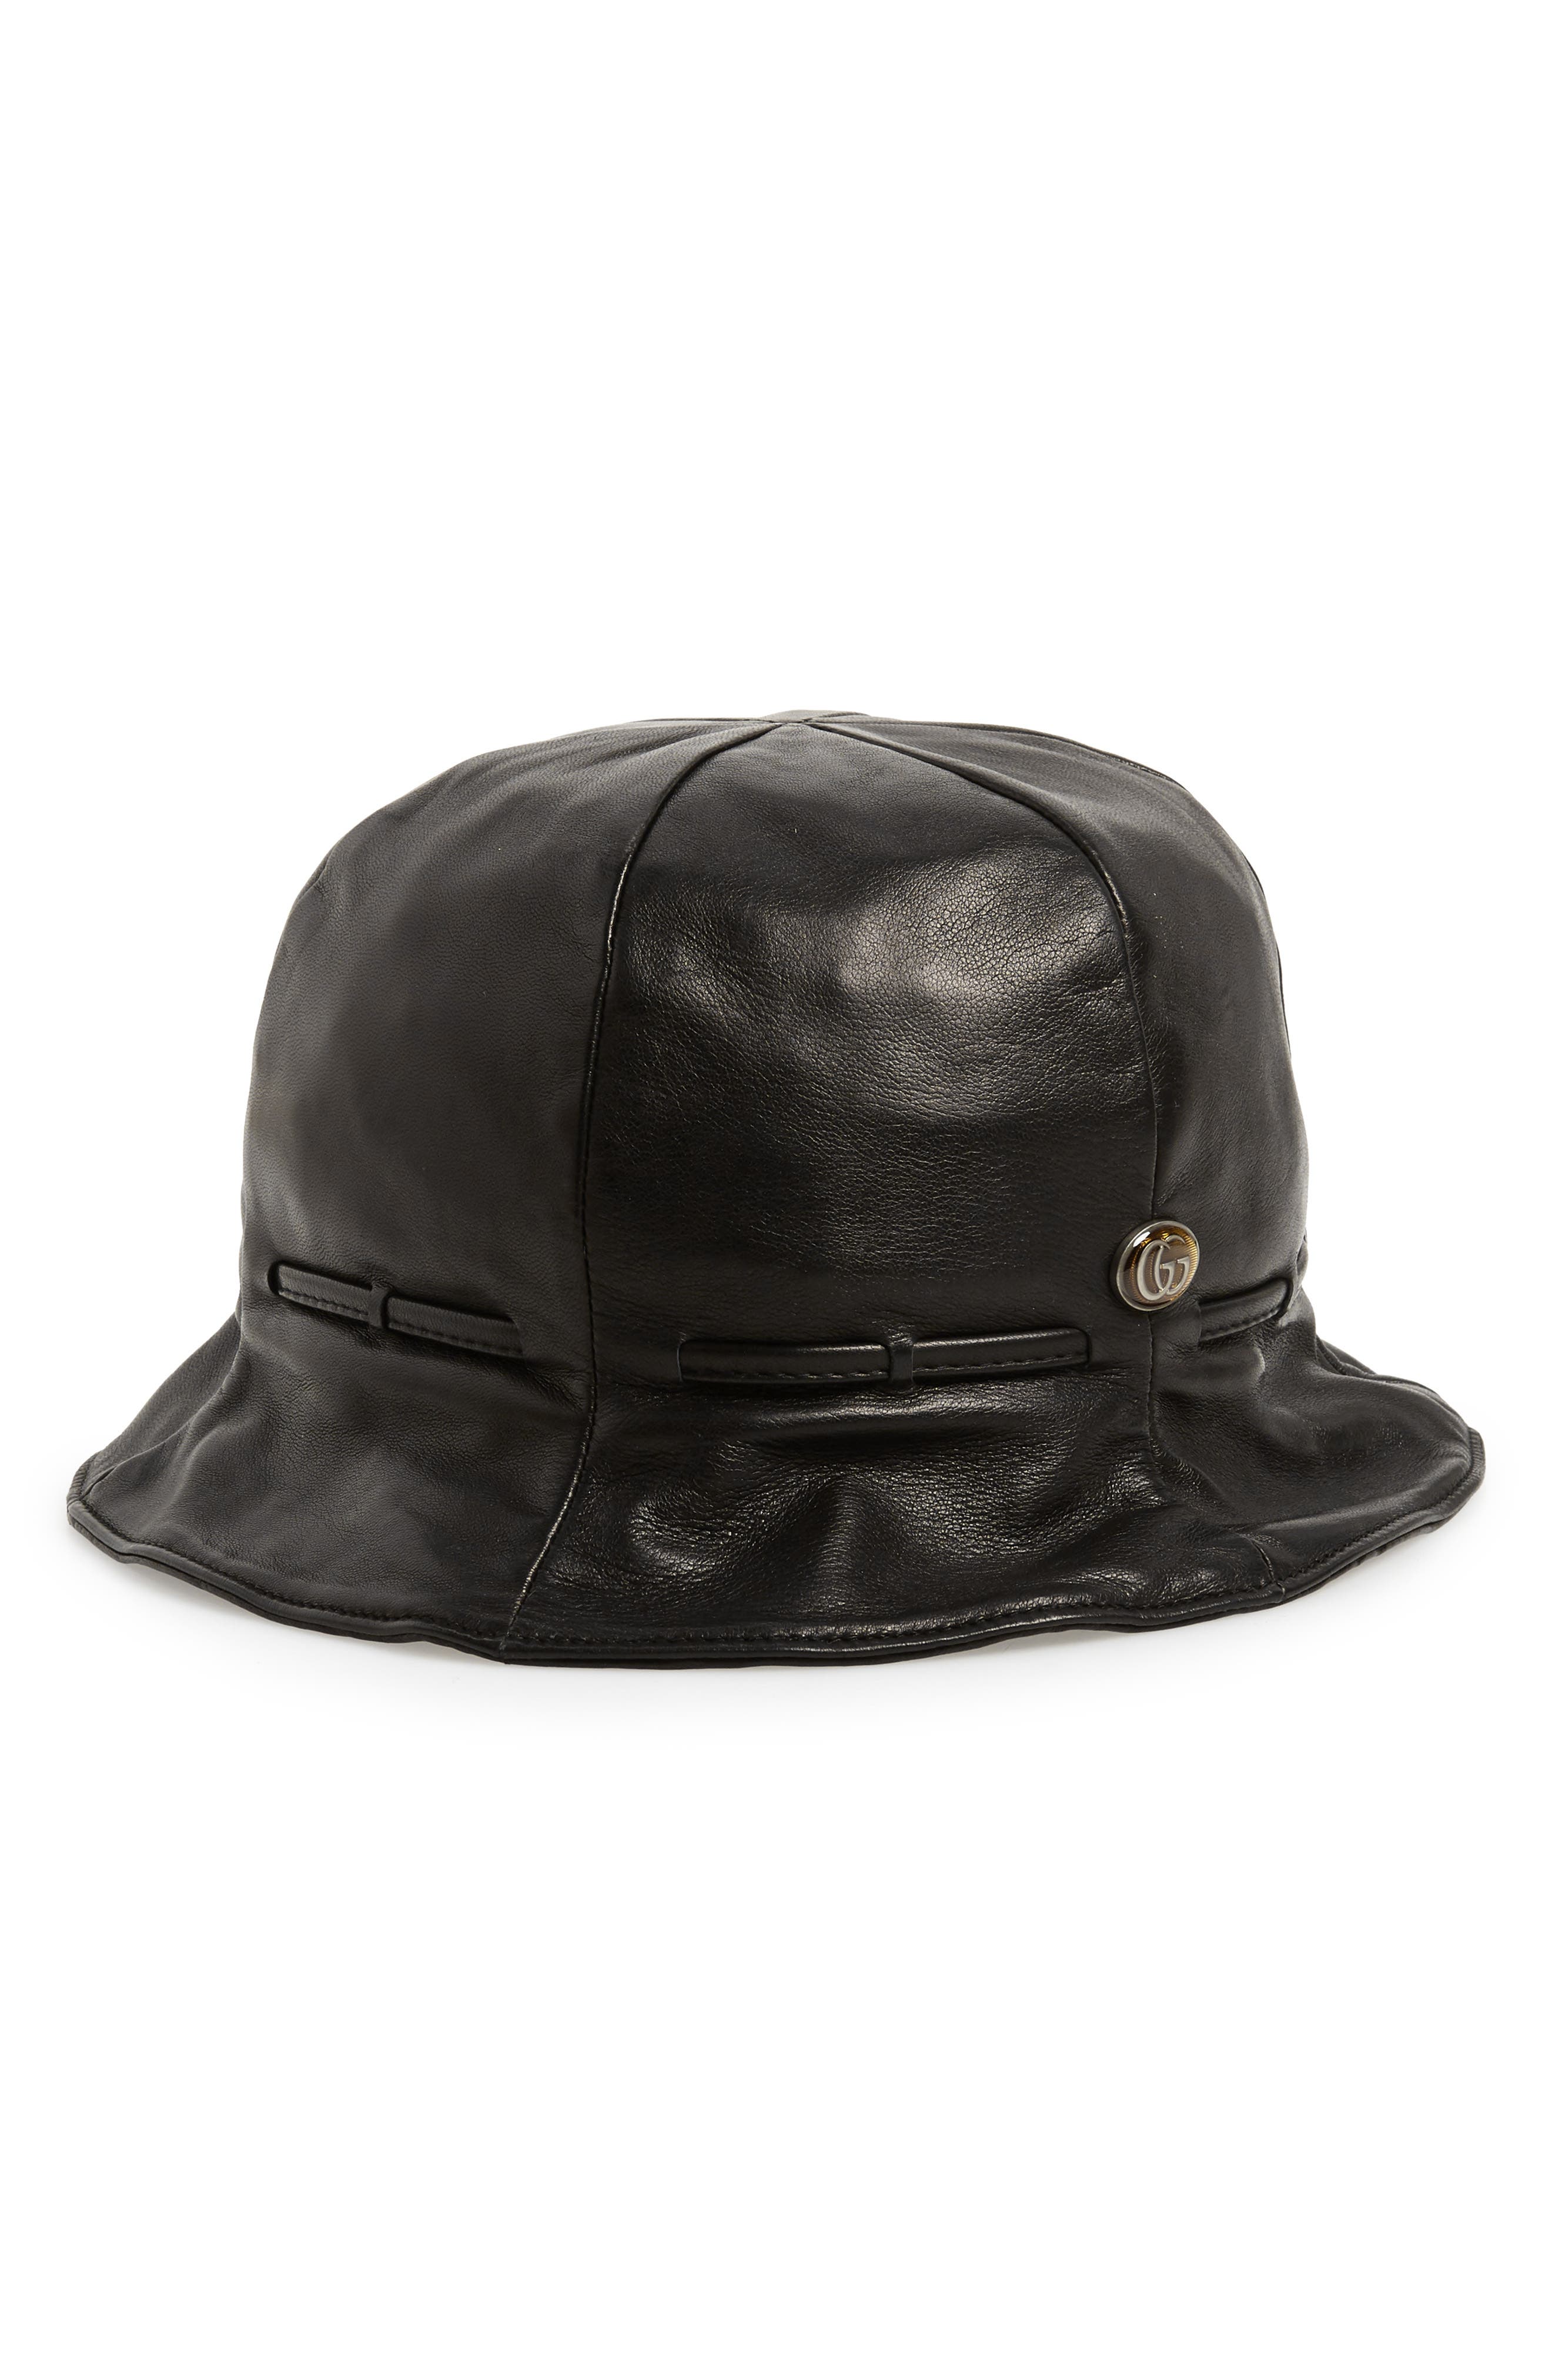 Gucci Leather Bucket Hat | Nordstrom